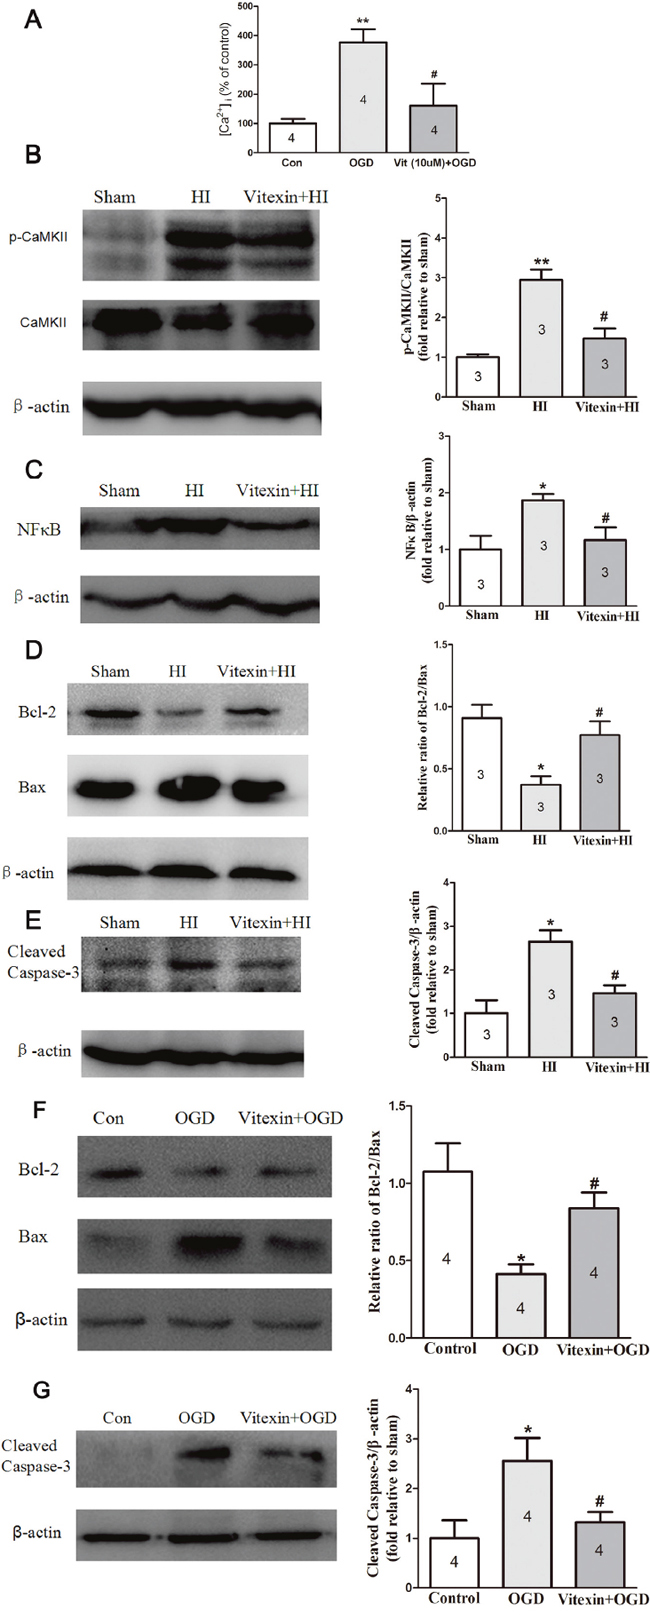 Vitexin pretreatment reduces ([Ca2+]i) in cells after OGD and inhibits CaMKII, NF-&#x03BA;B and apoptosis-related proteins expression in vivo and in vitro post-HI insult.